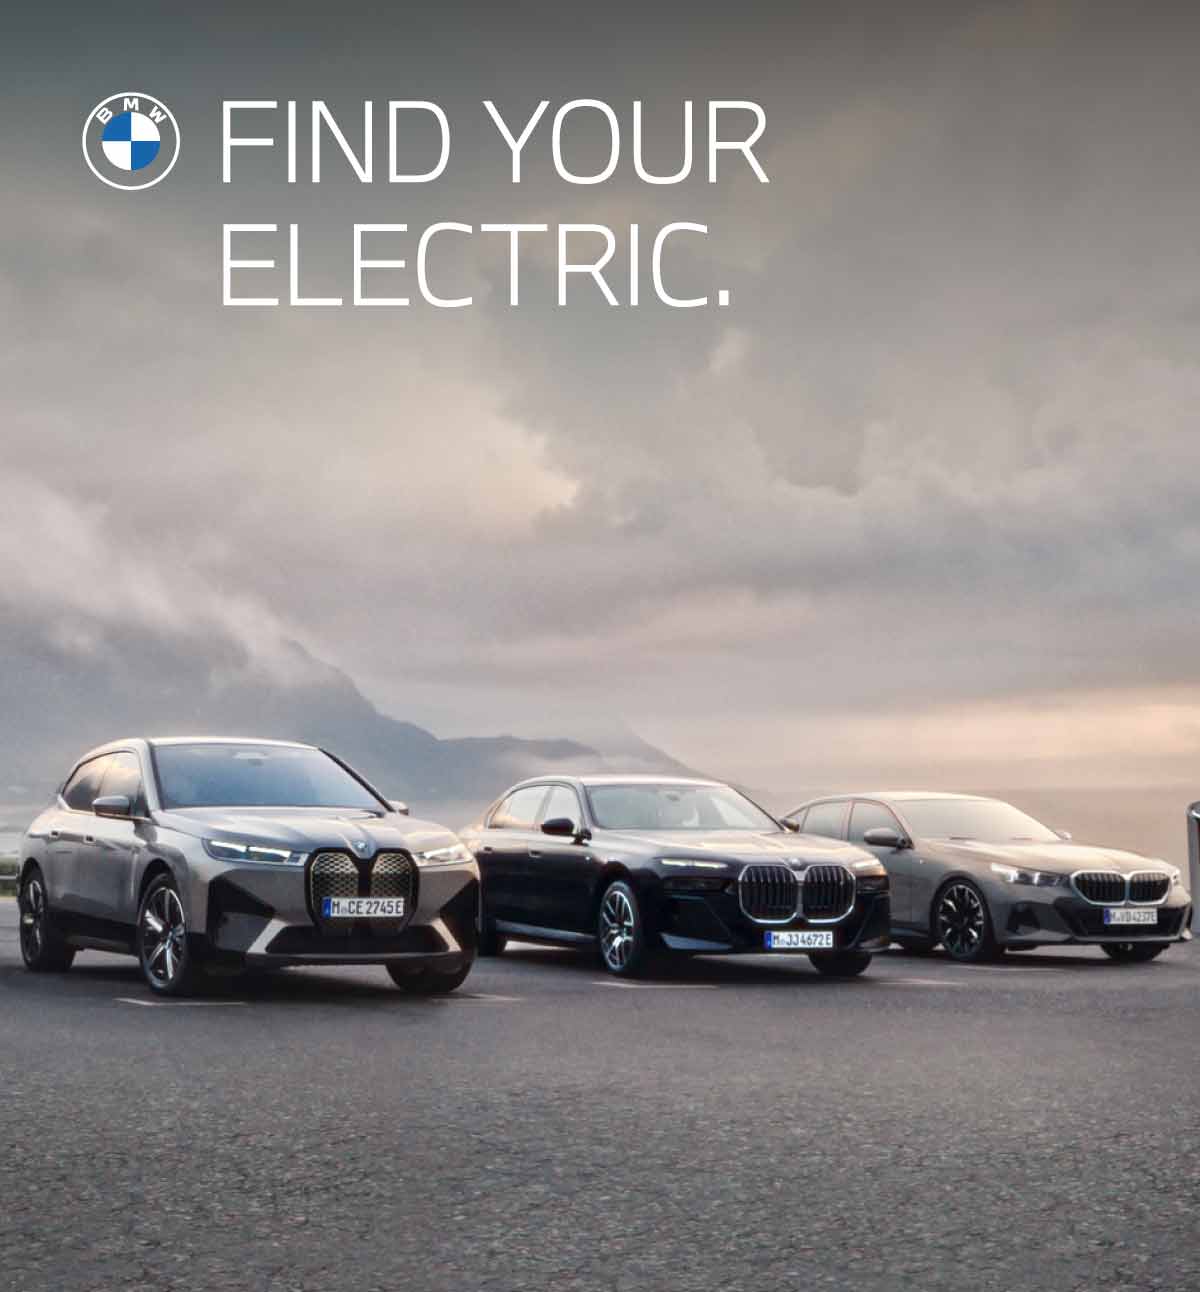 Find your electric BMW